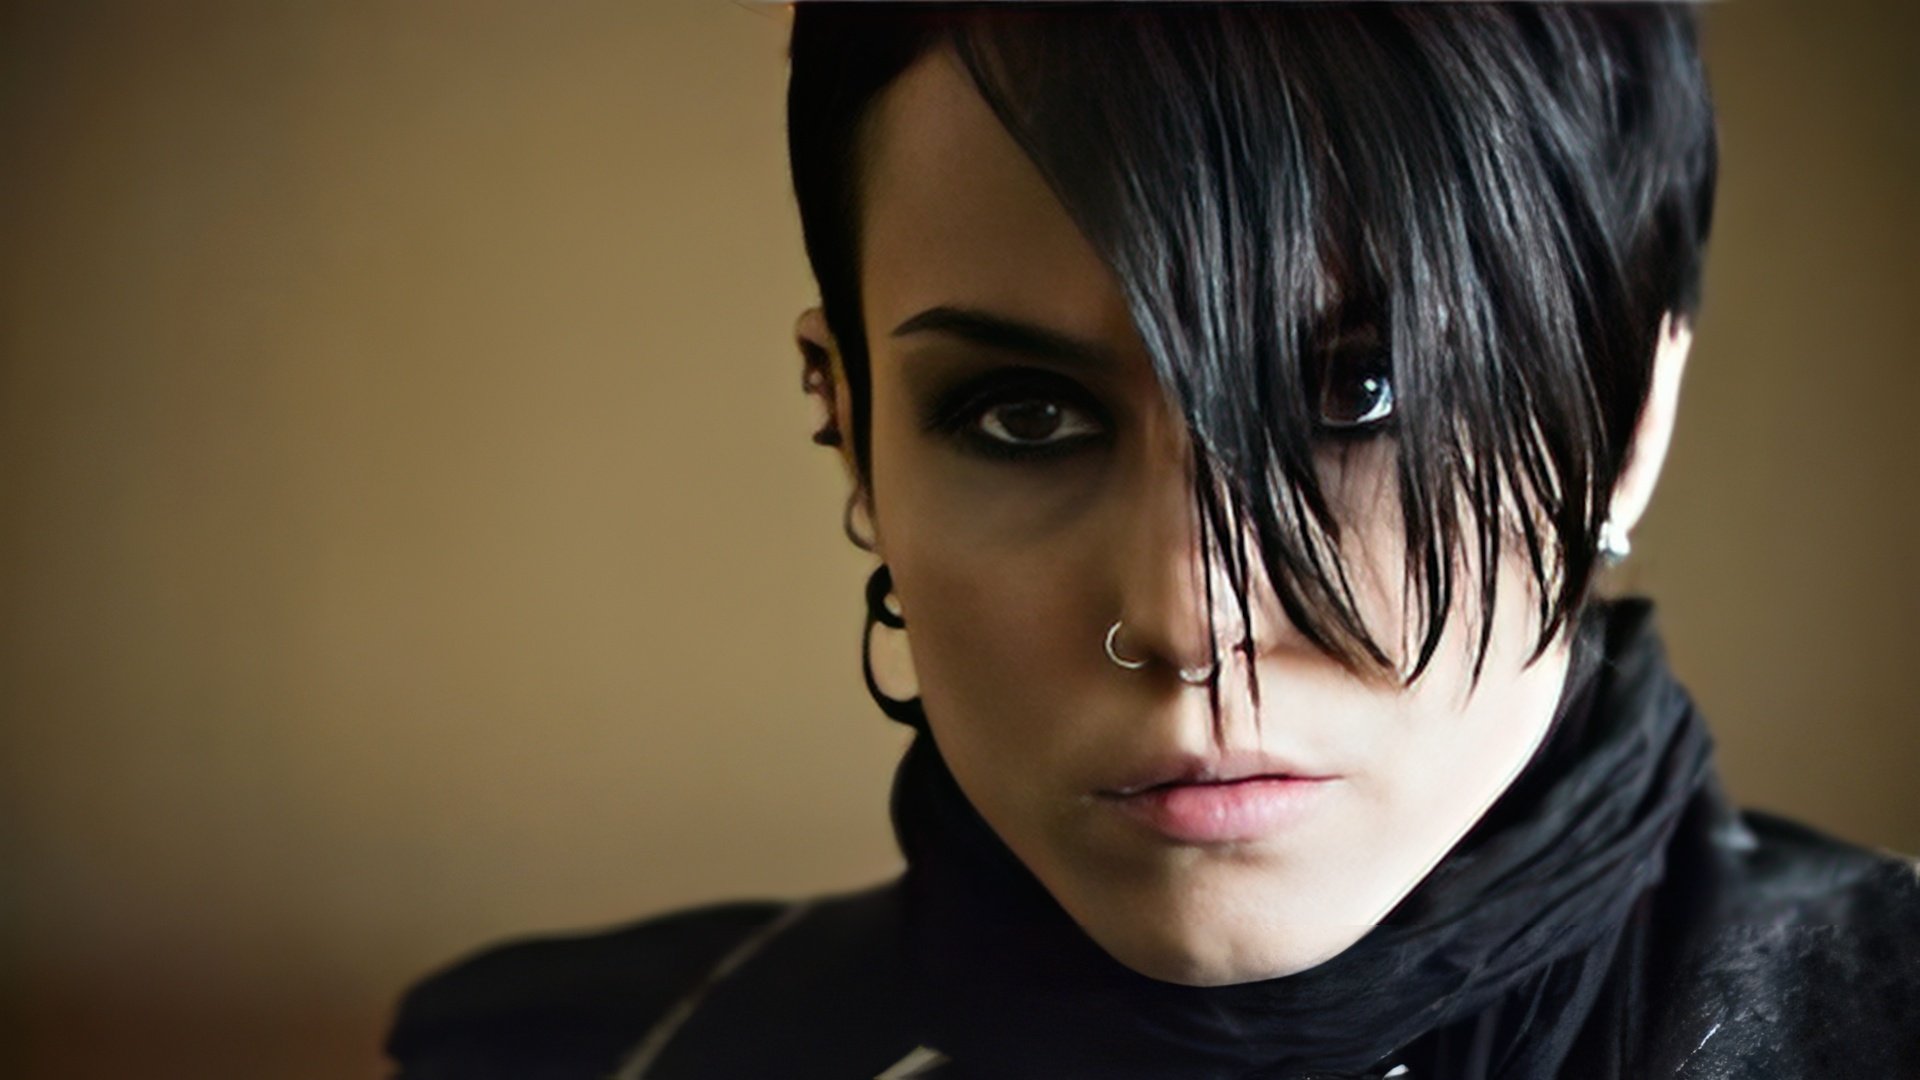 »The Girl with the Dragon Tattoo»: Noomi Rapace as Lisbeth Salander